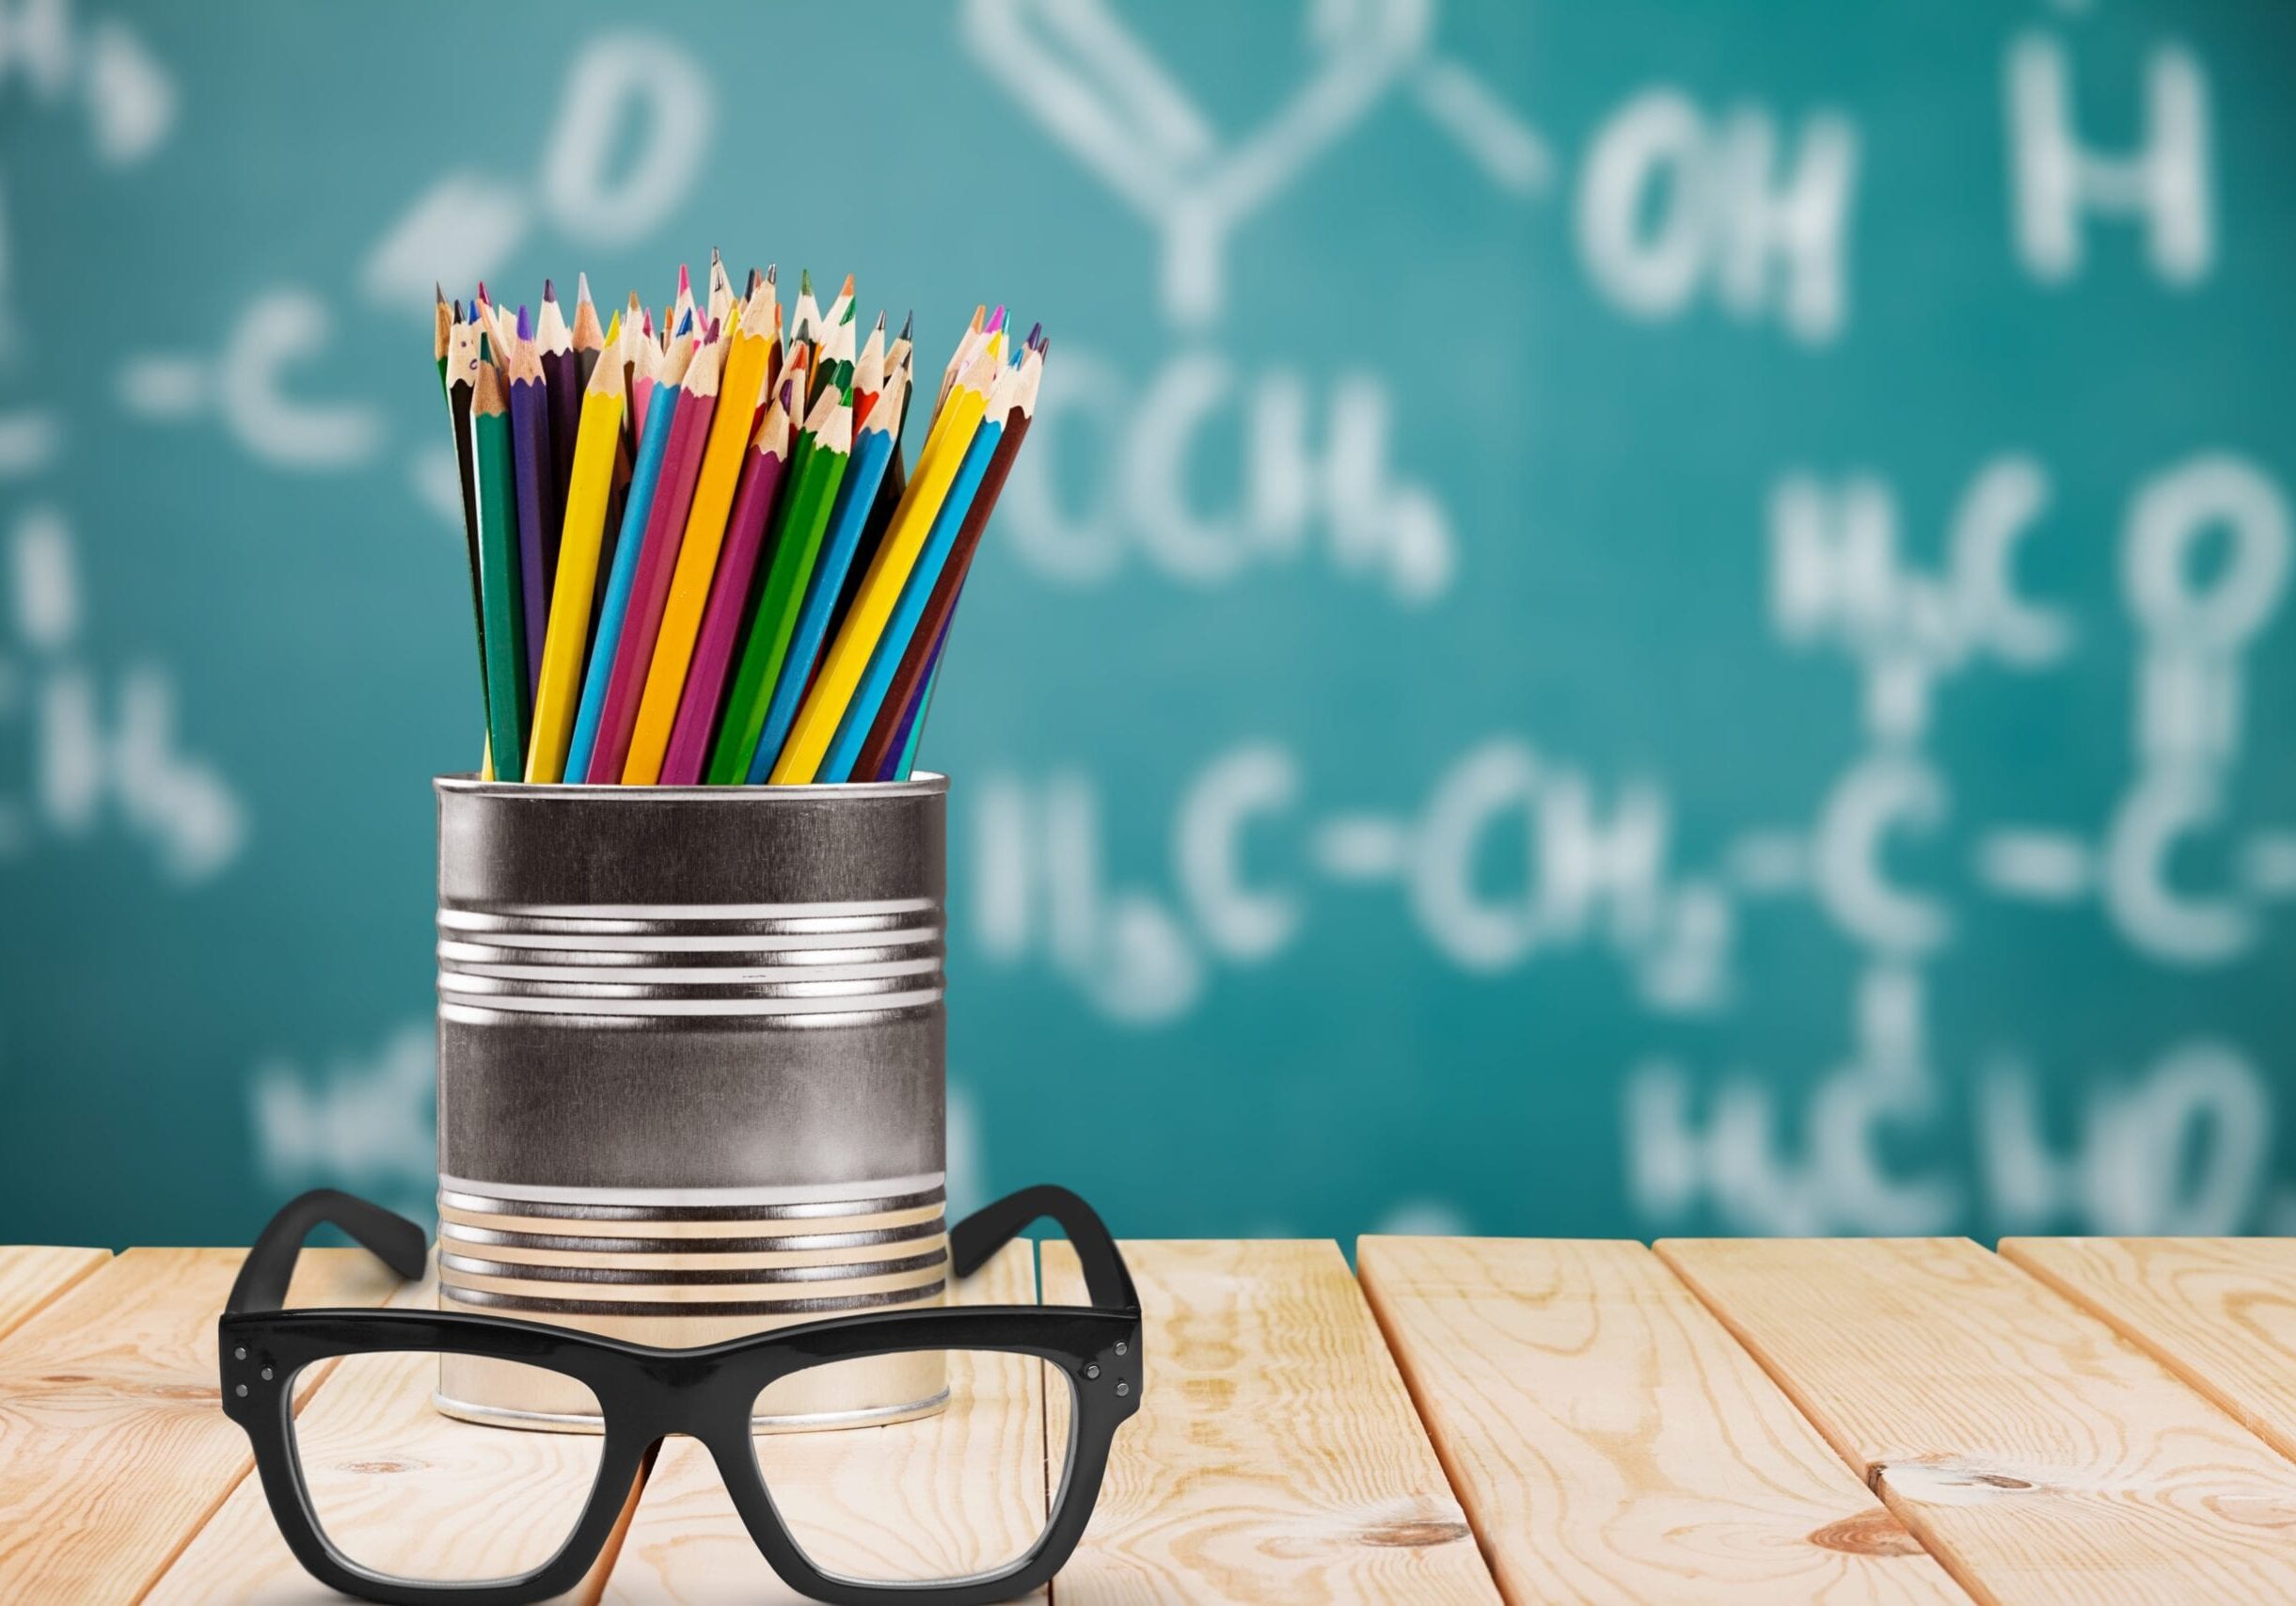 Classroom image: Pot of pencils and pair of glasses on desk in foreground with blackboard with writing on it blurred in background